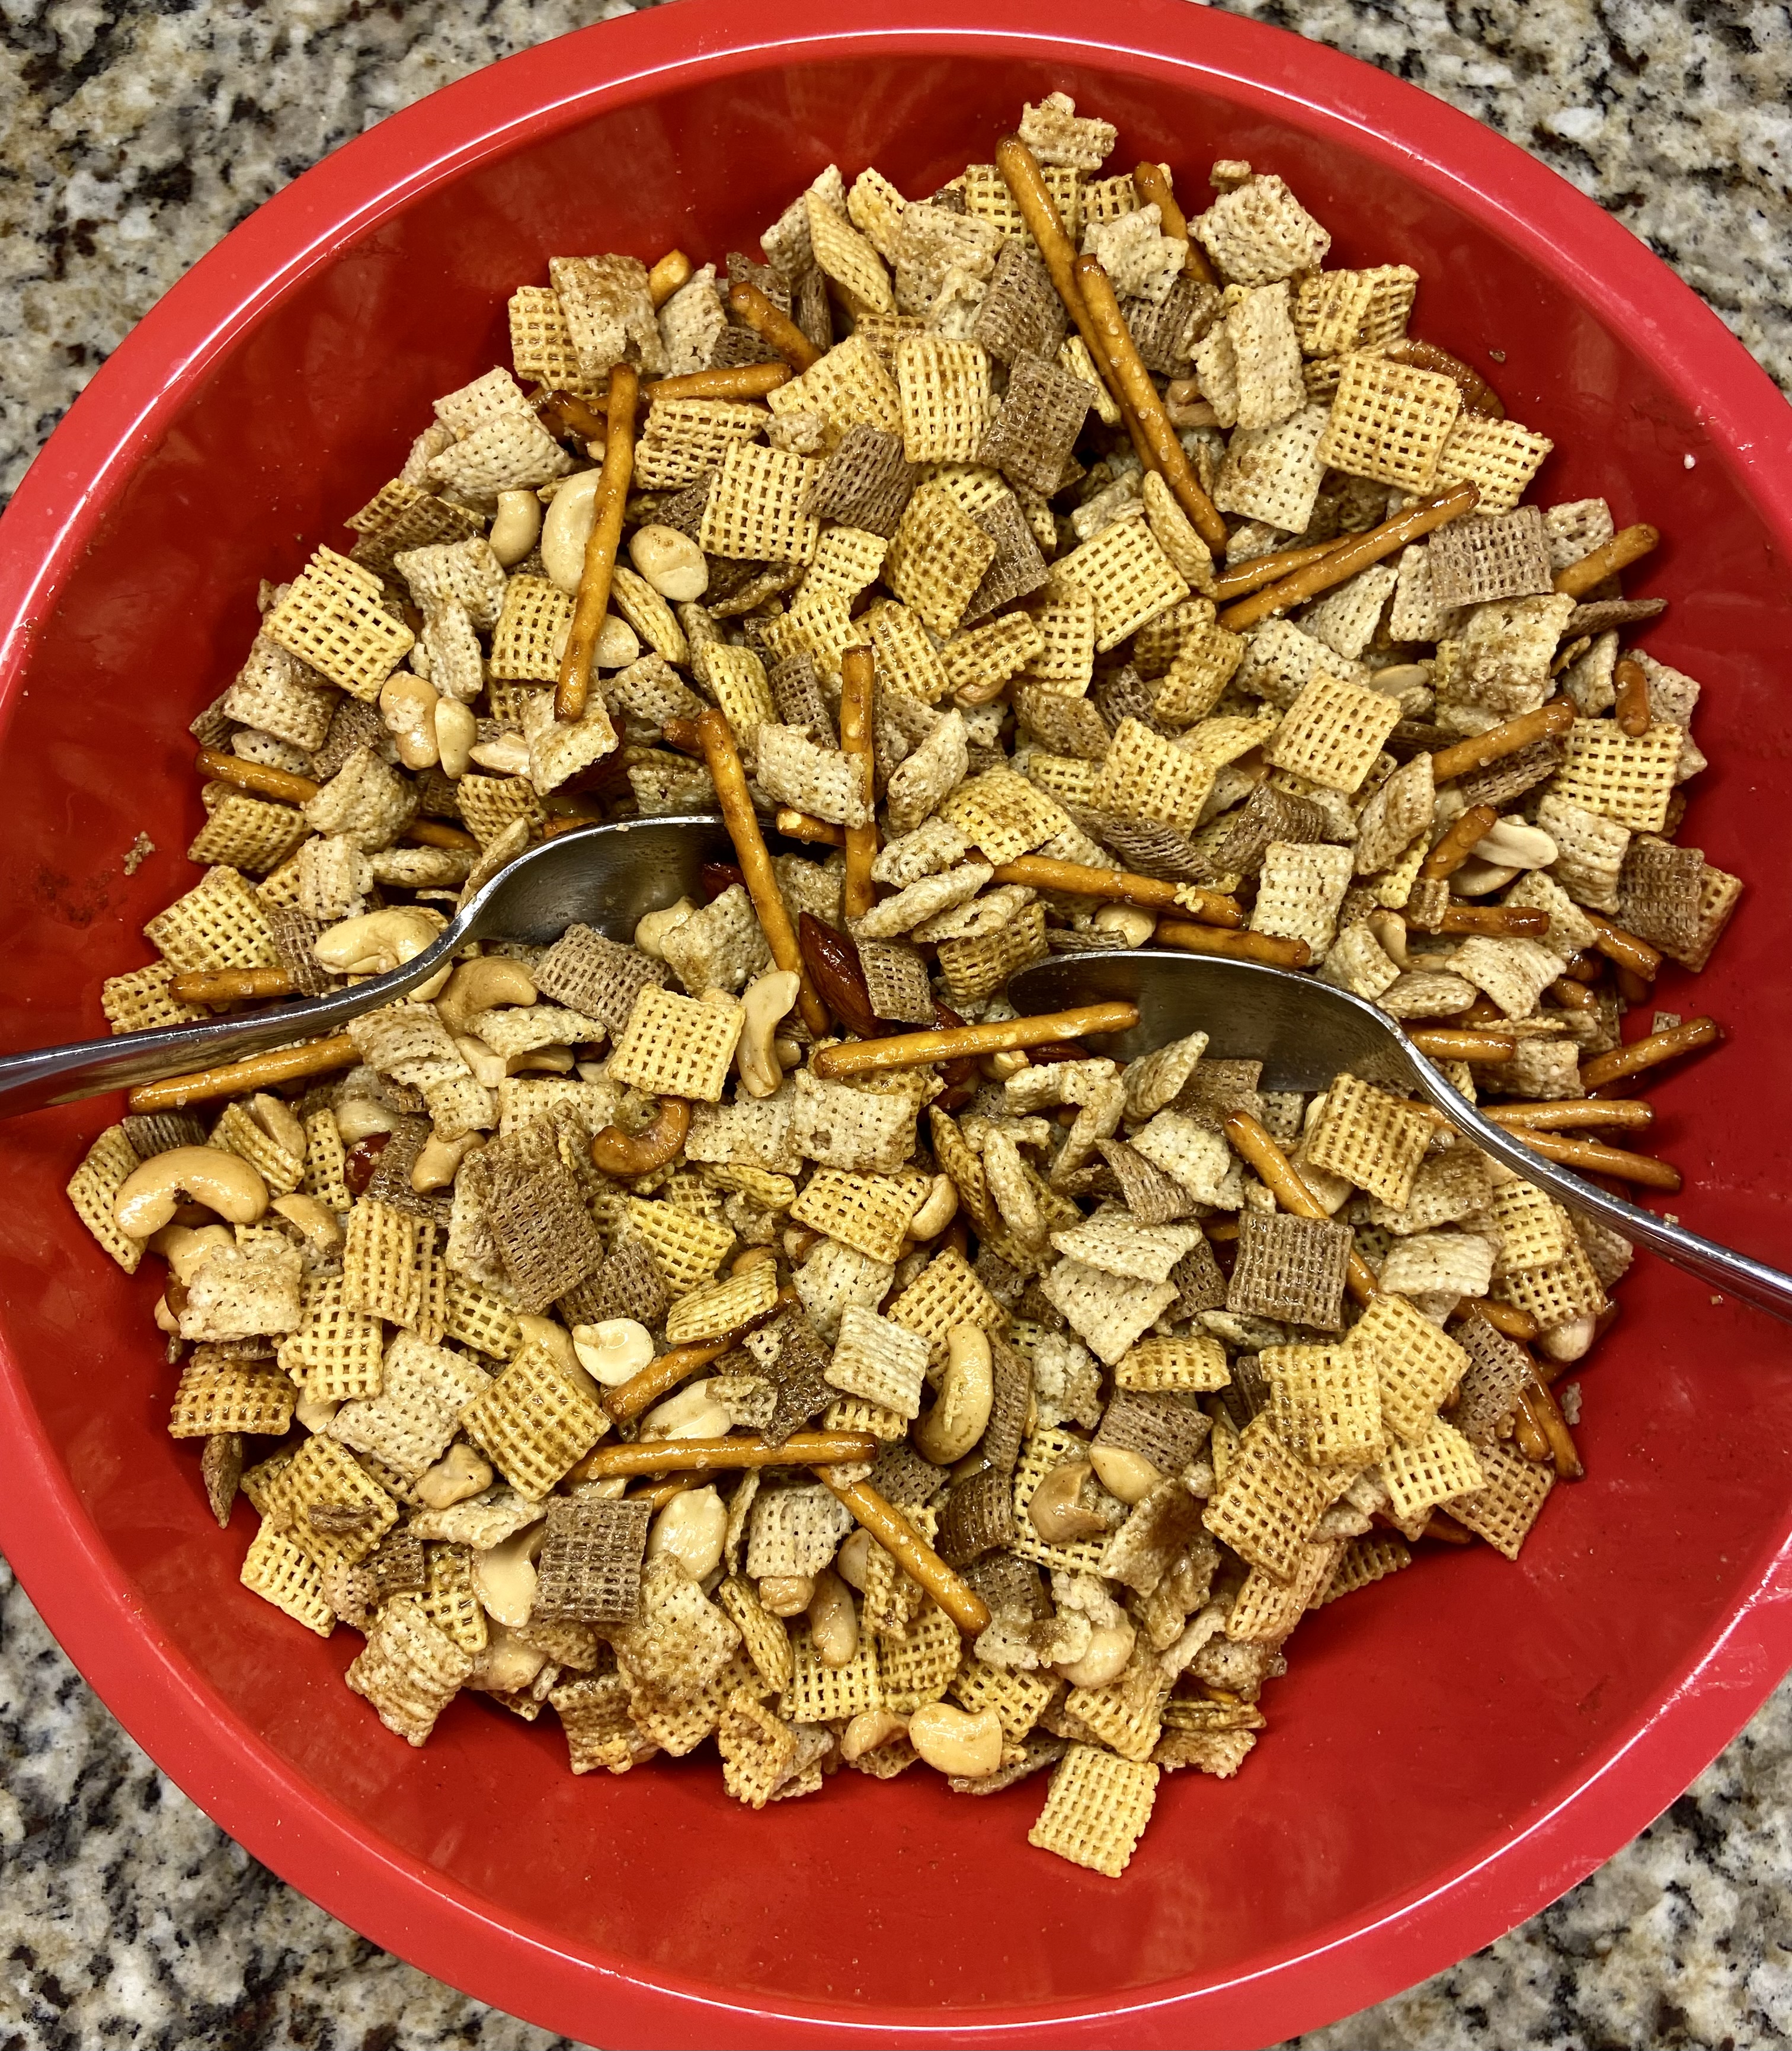 butter mix coating the chex mix